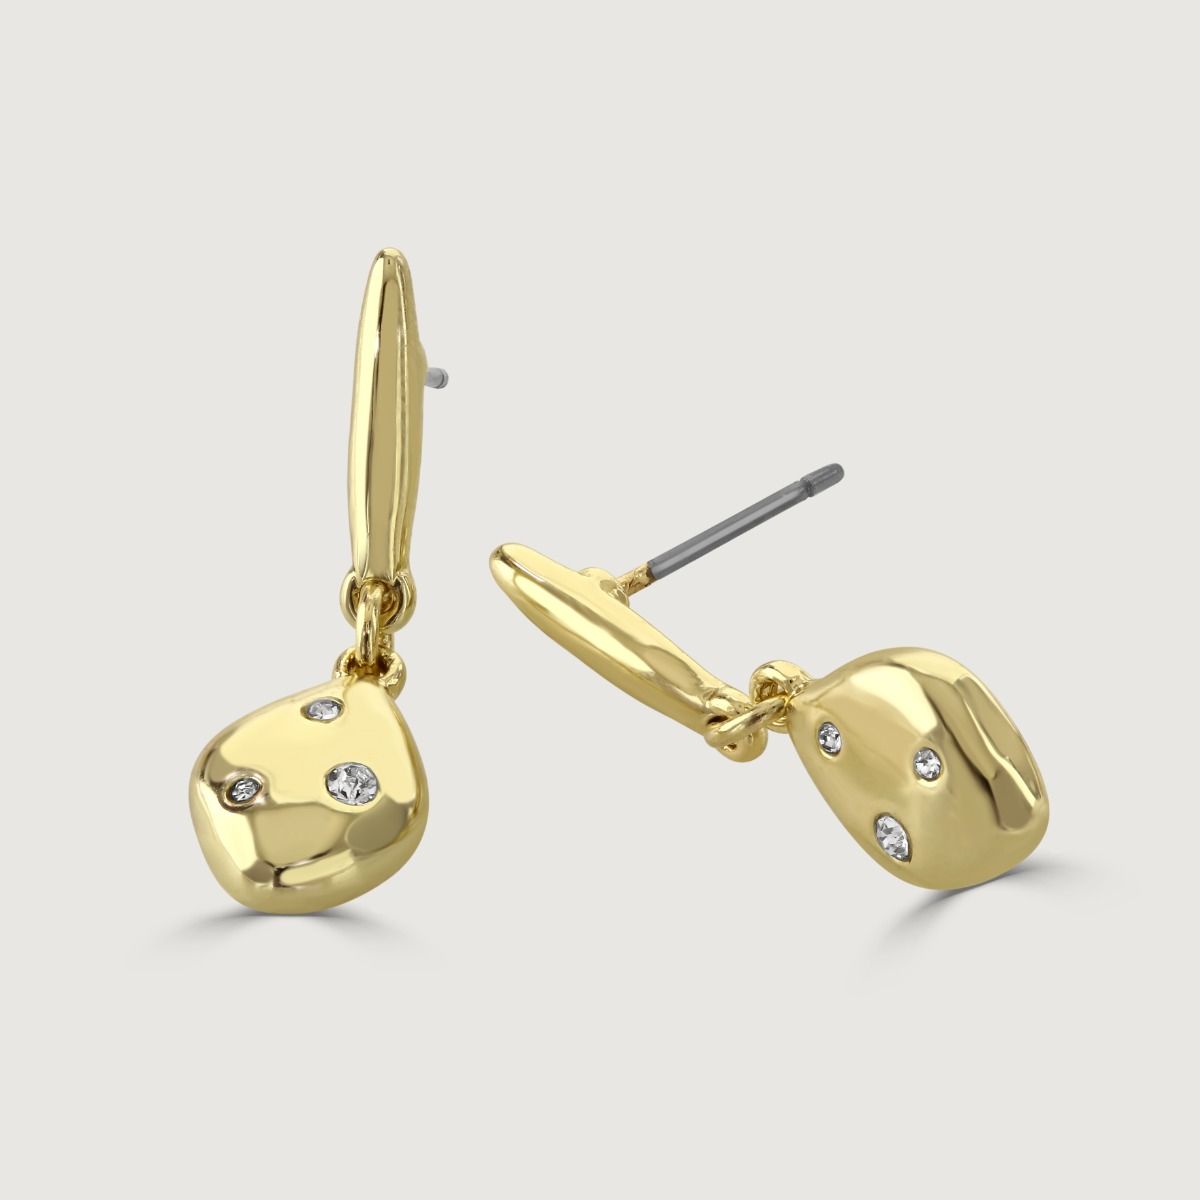 The Crystal Set Polished Drop Earrings are captivating and glamorous accessories. Expertly crafted with polished metal and adorned with sparkling crystals, these earrings exude elegance and sophistication. The drop design adds a touch of grace and movemen